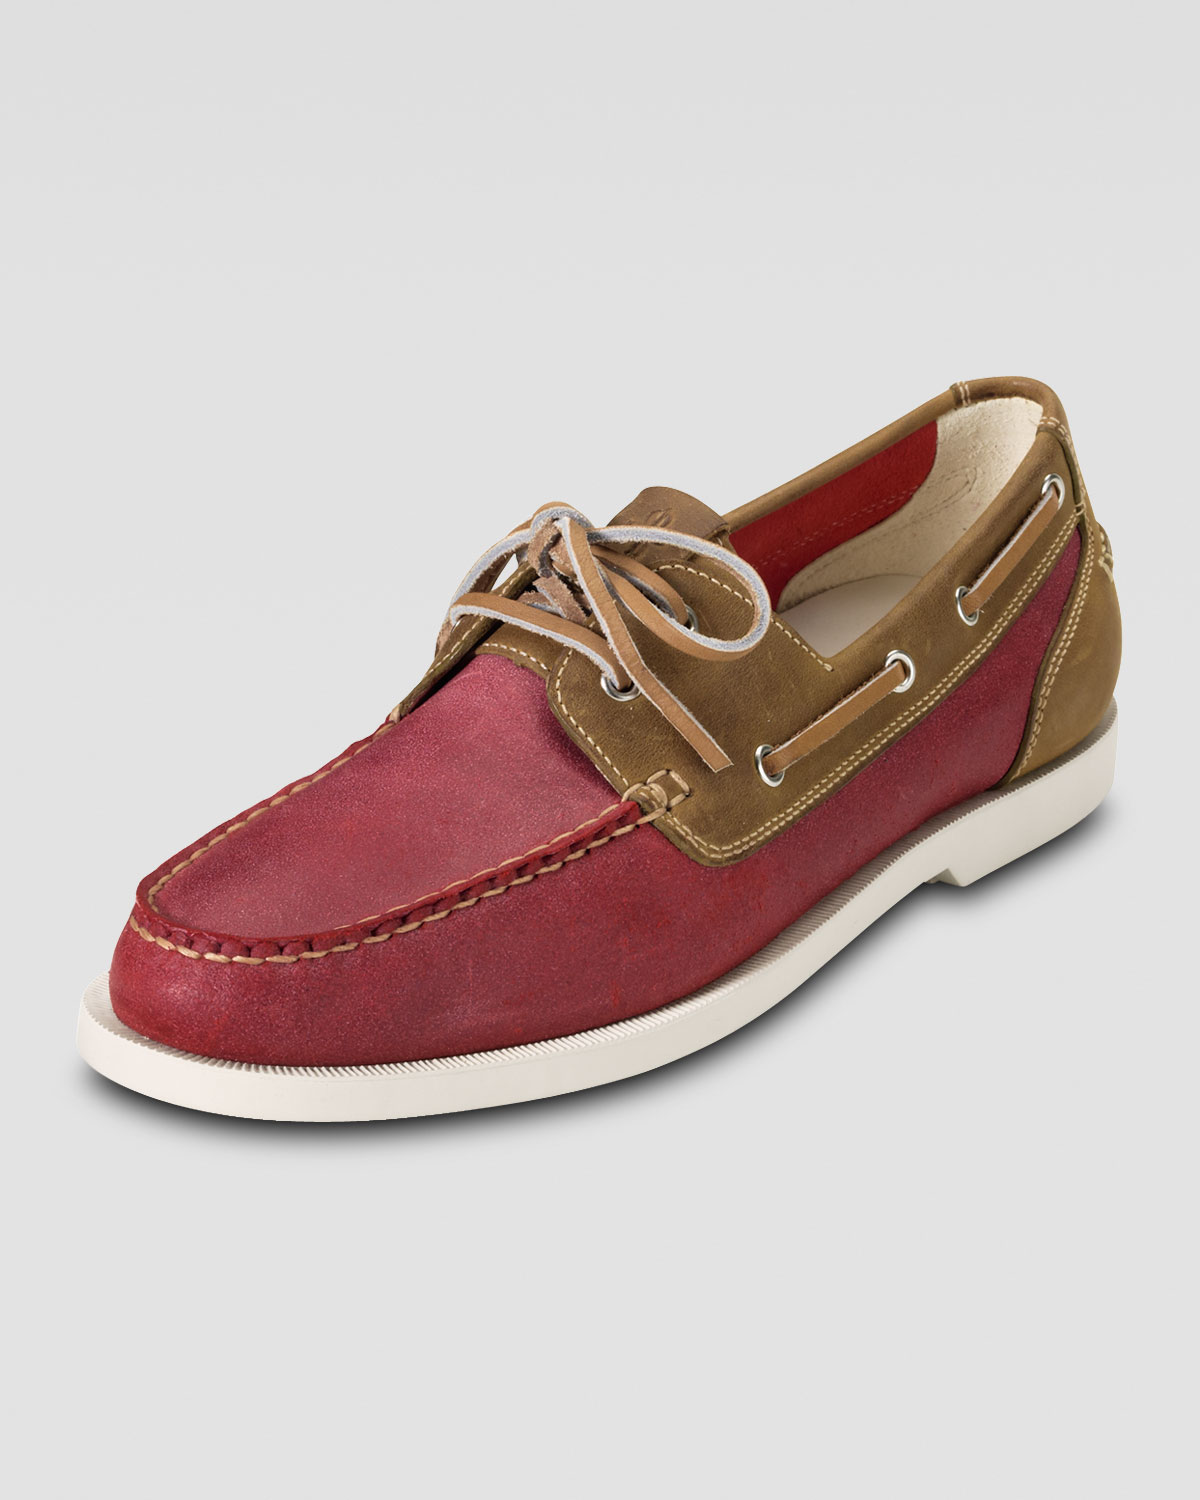 Cole Haan Air Yacht Club Boat Shoe in Multicolor for Men